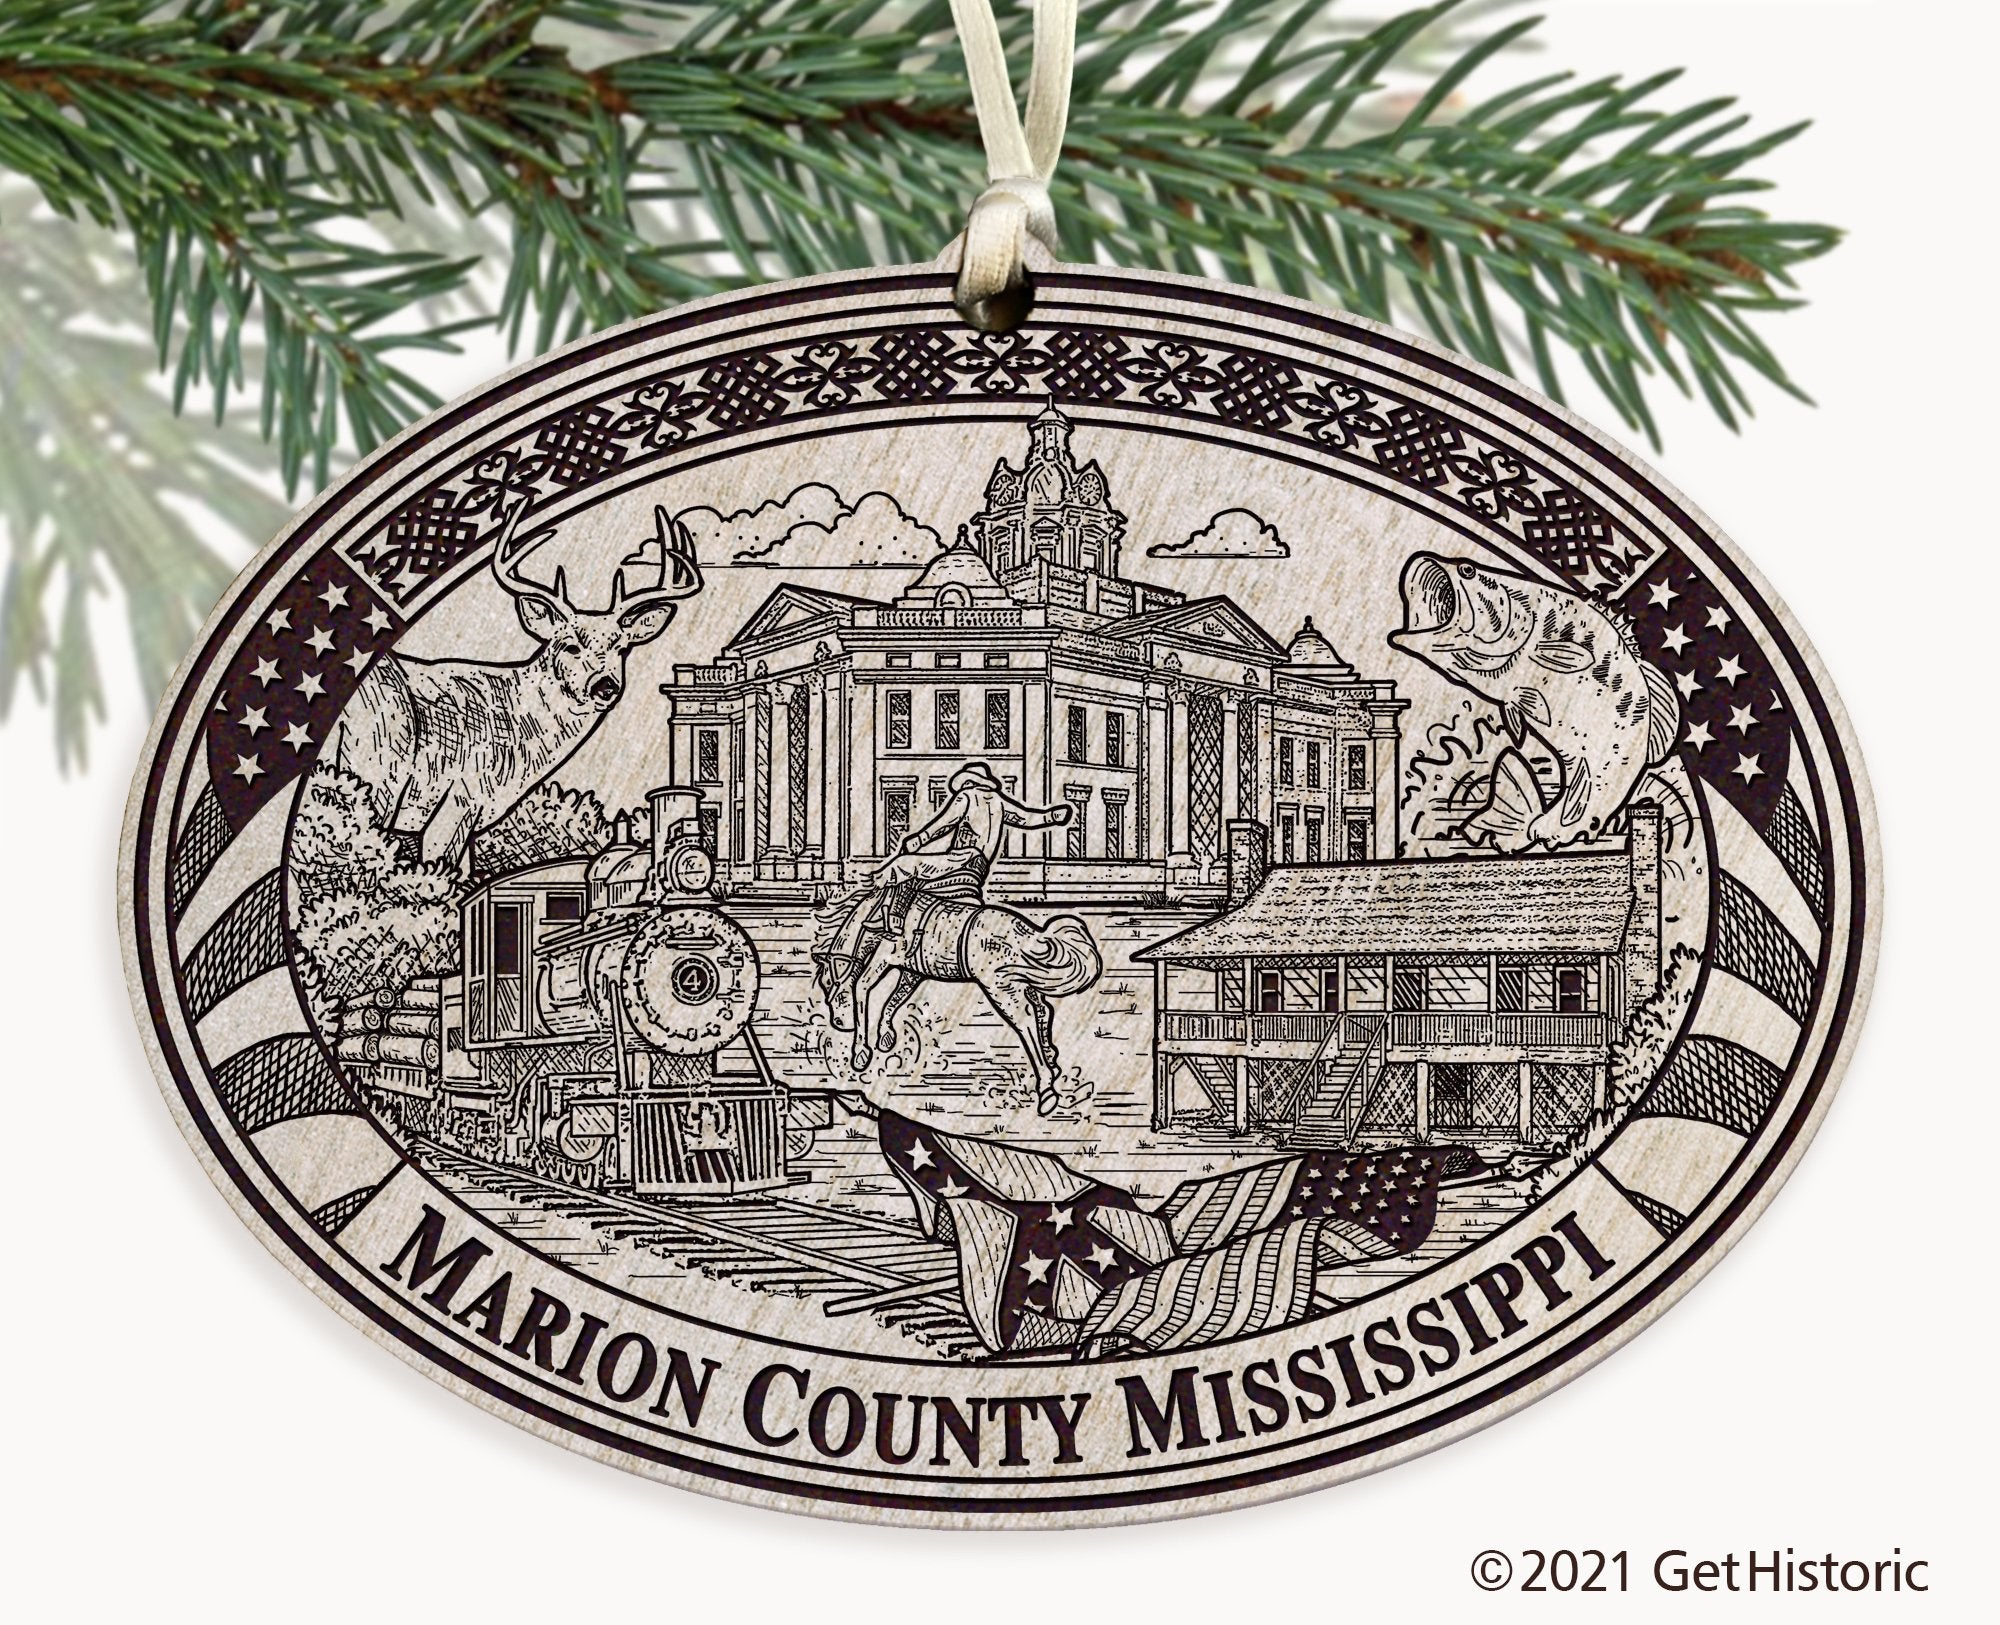 Marion County Mississippi Engraved Ornament